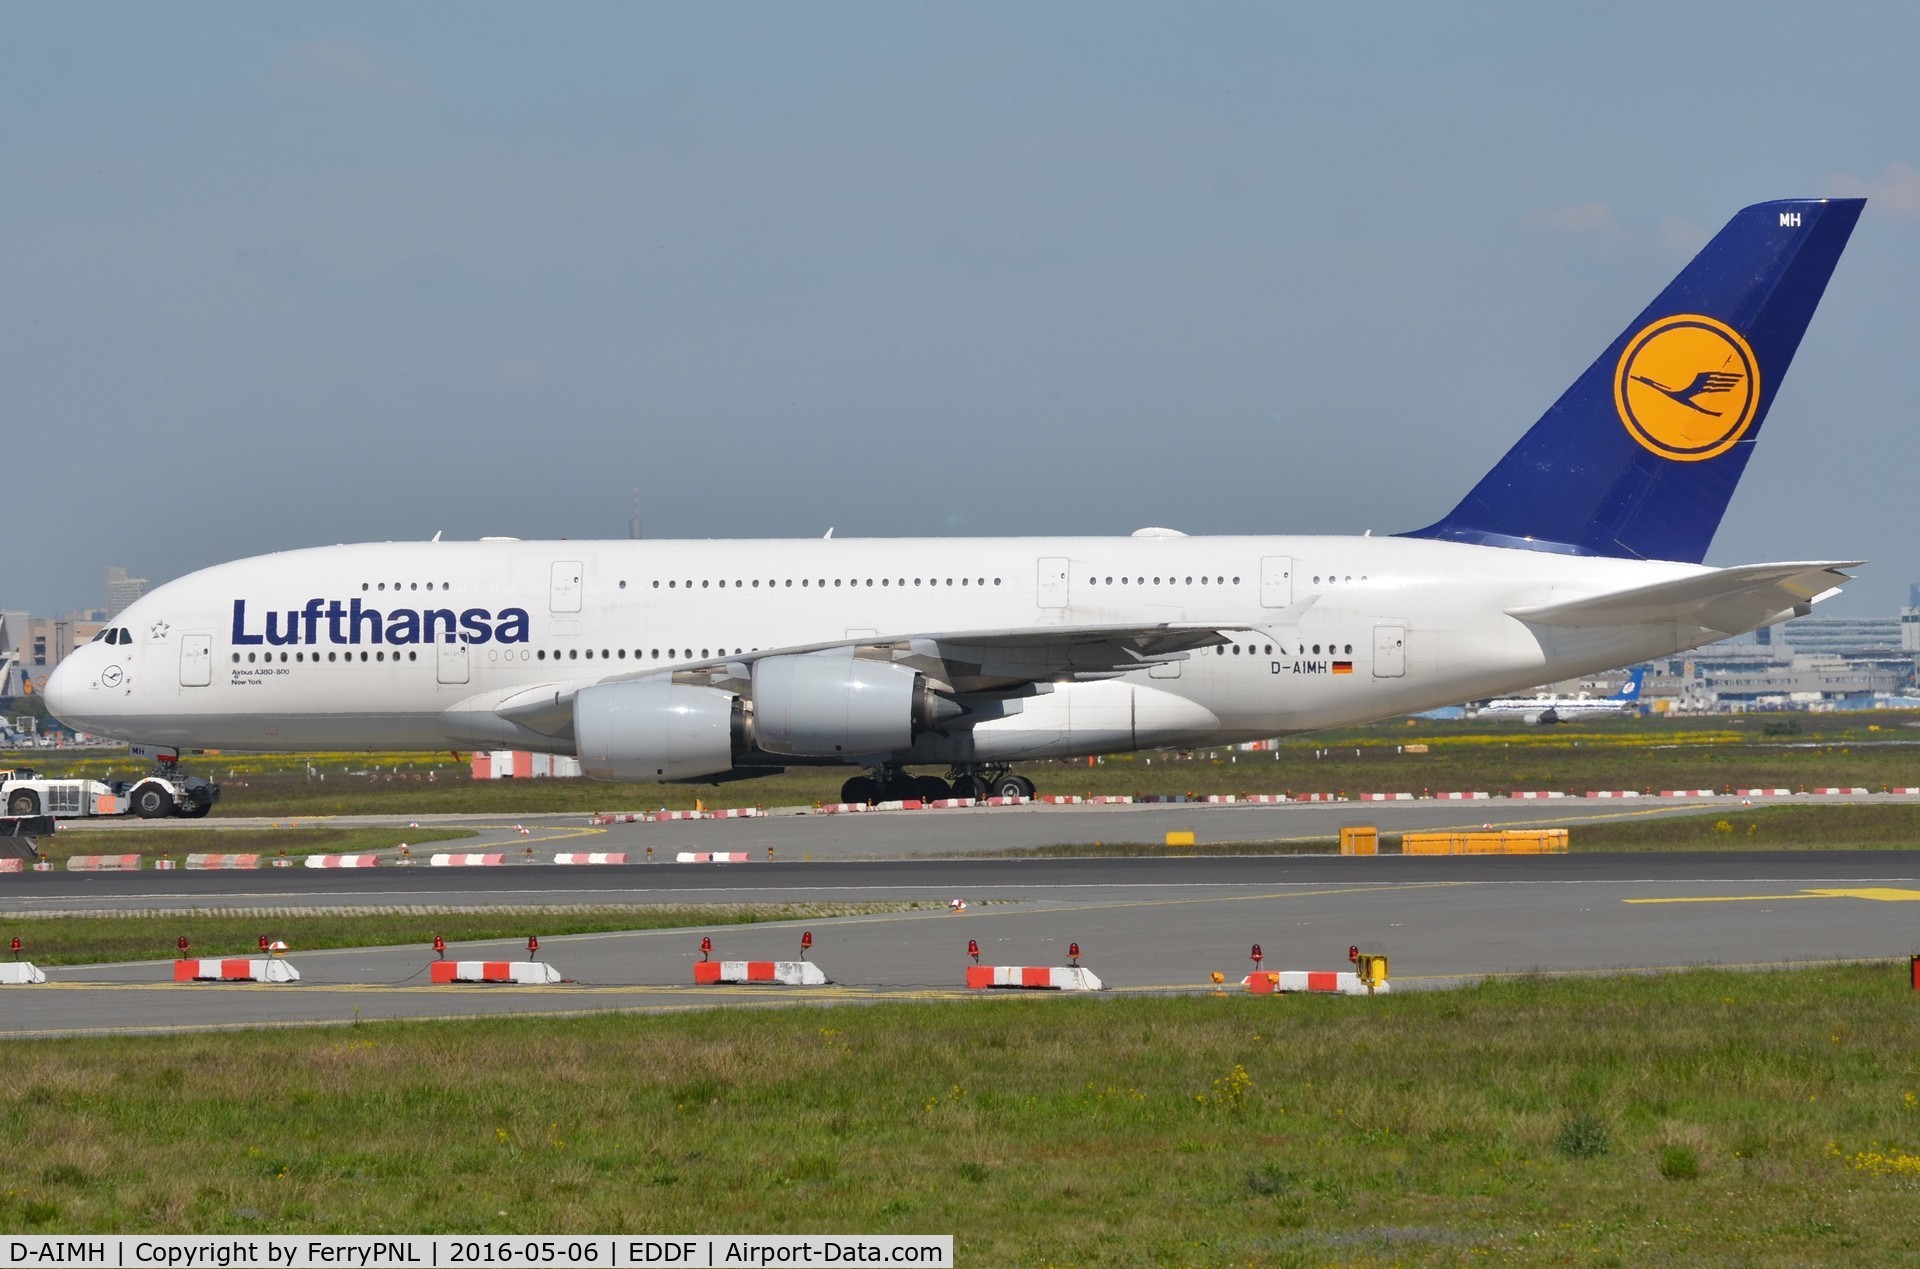 D-AIMH, 2010 Airbus A380-841 C/N 070, LH A388 under tow after an oil change.